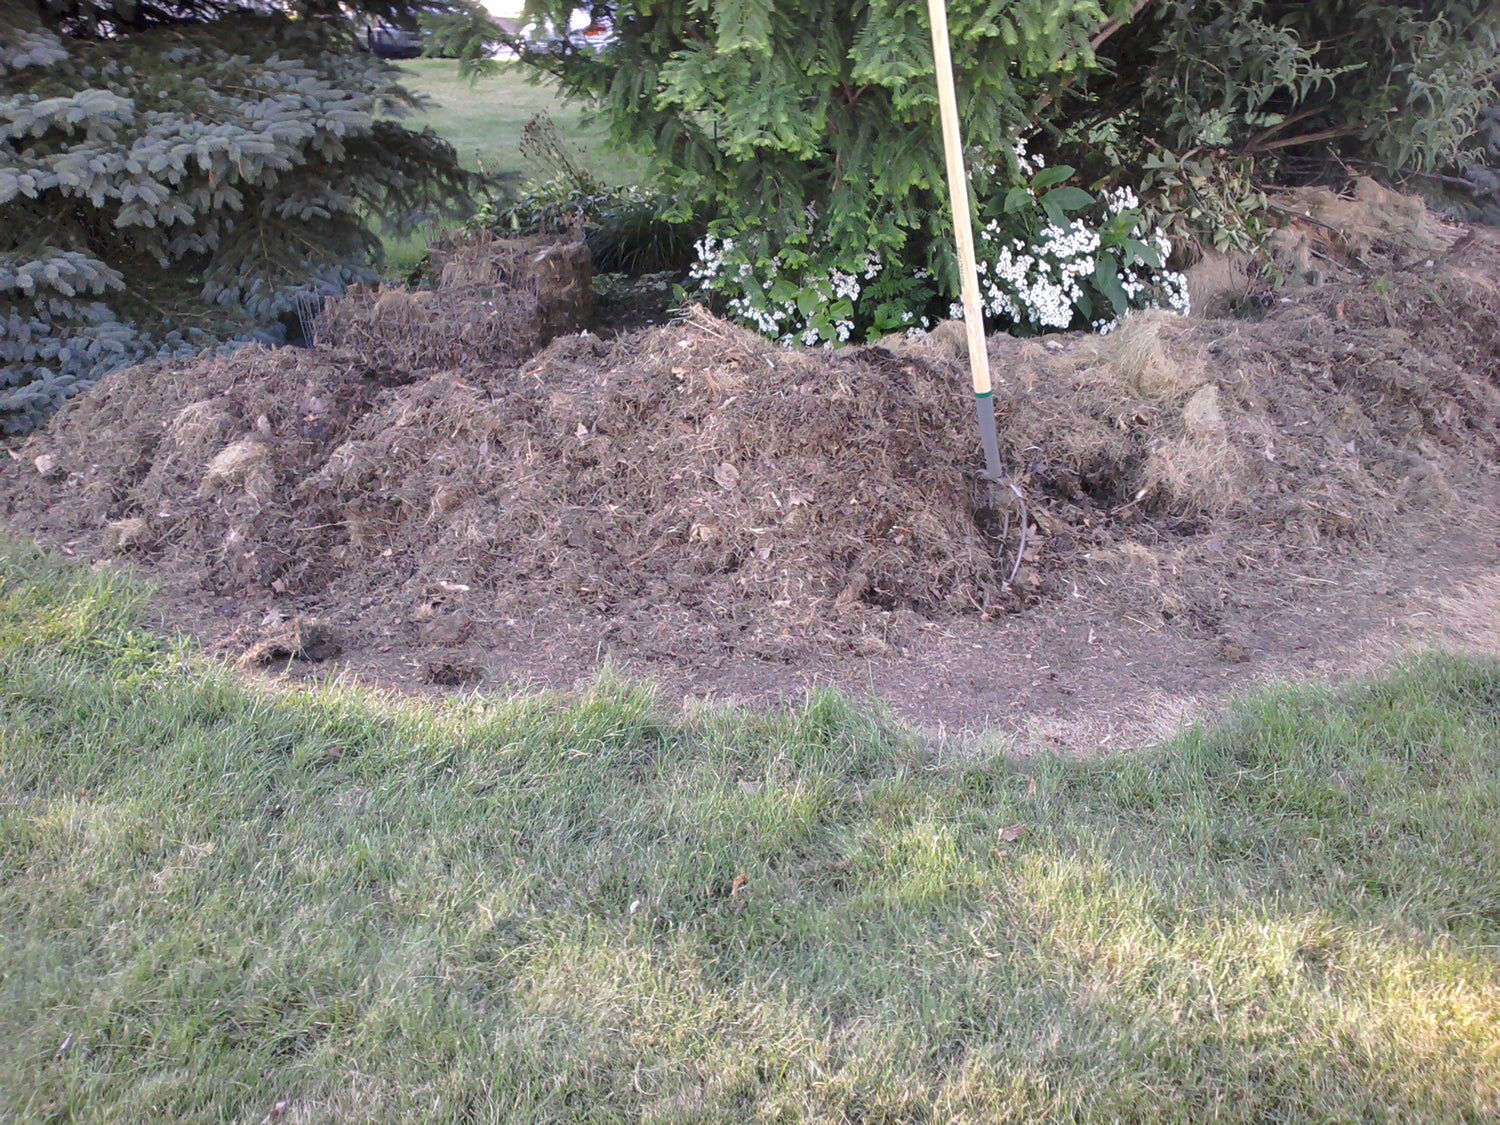 A residential compost pile being maintained